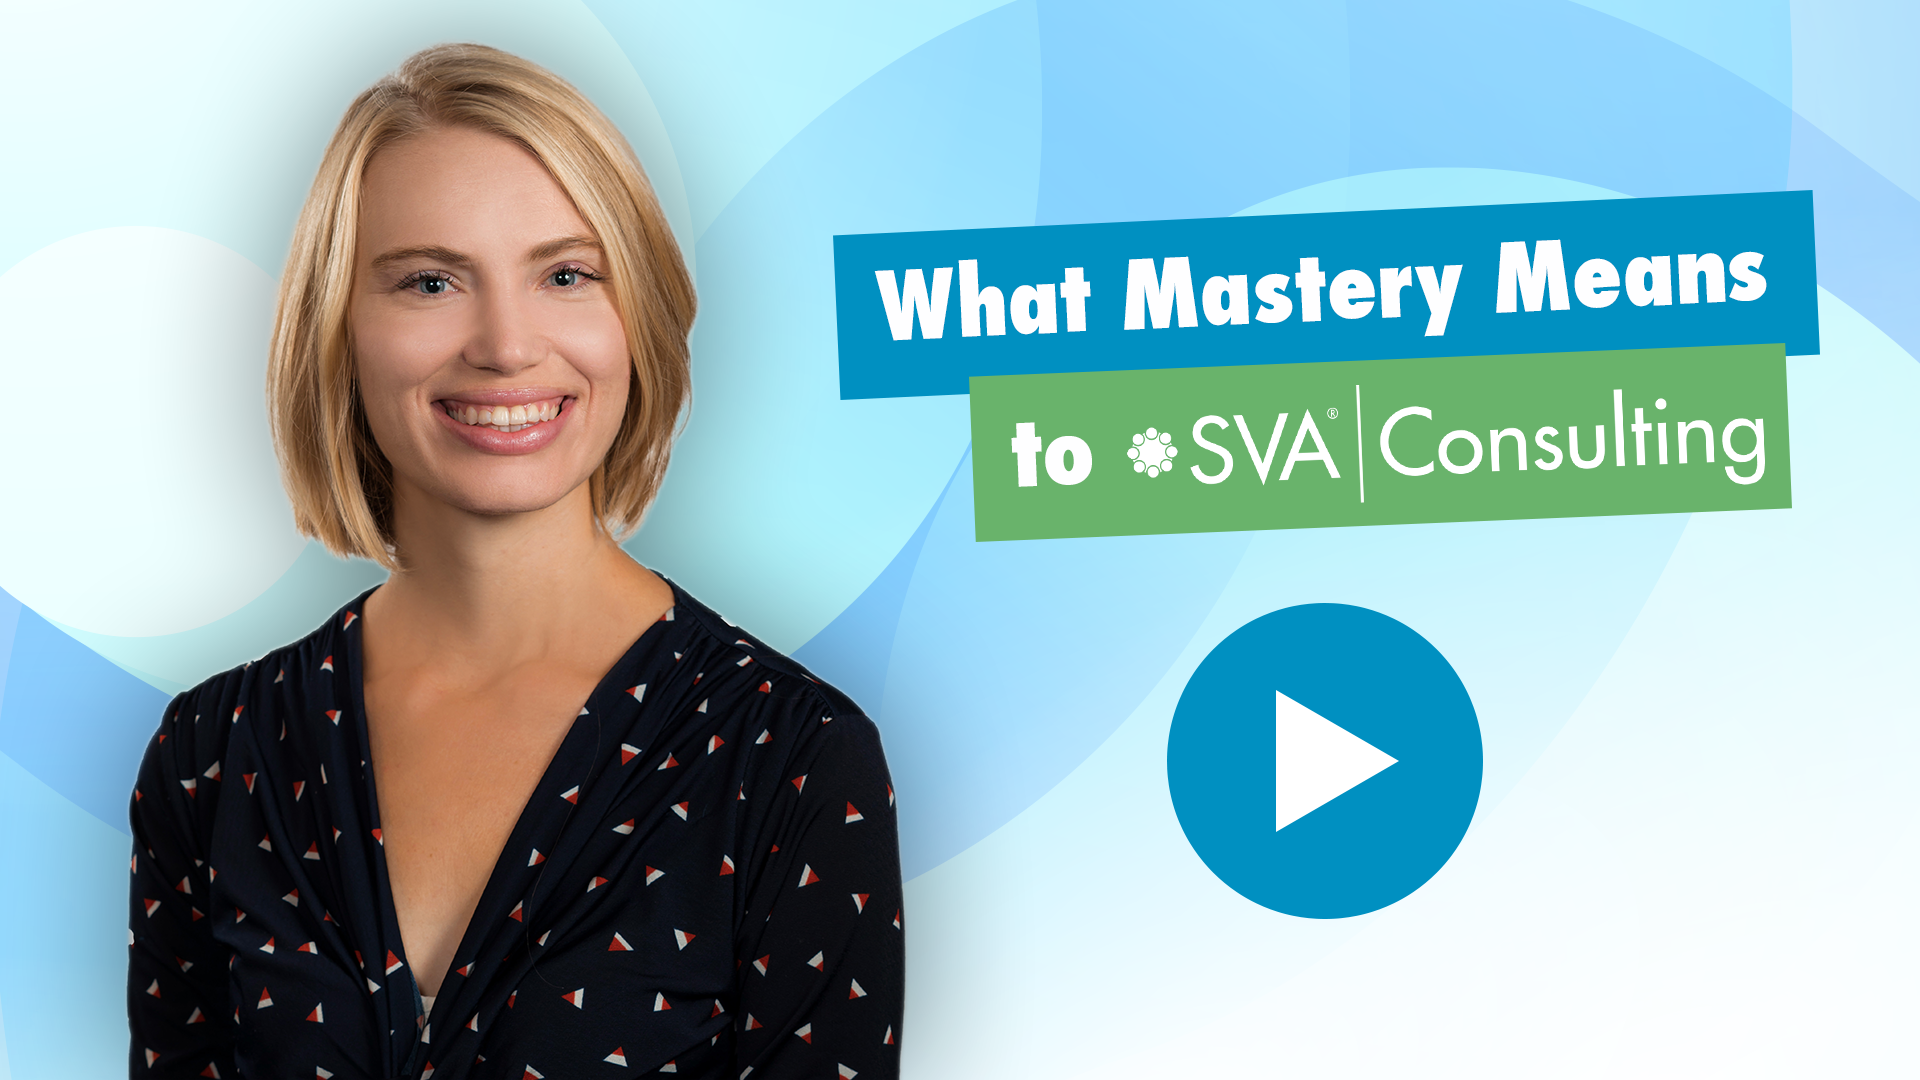 What Mastery Means to SVA Consulting